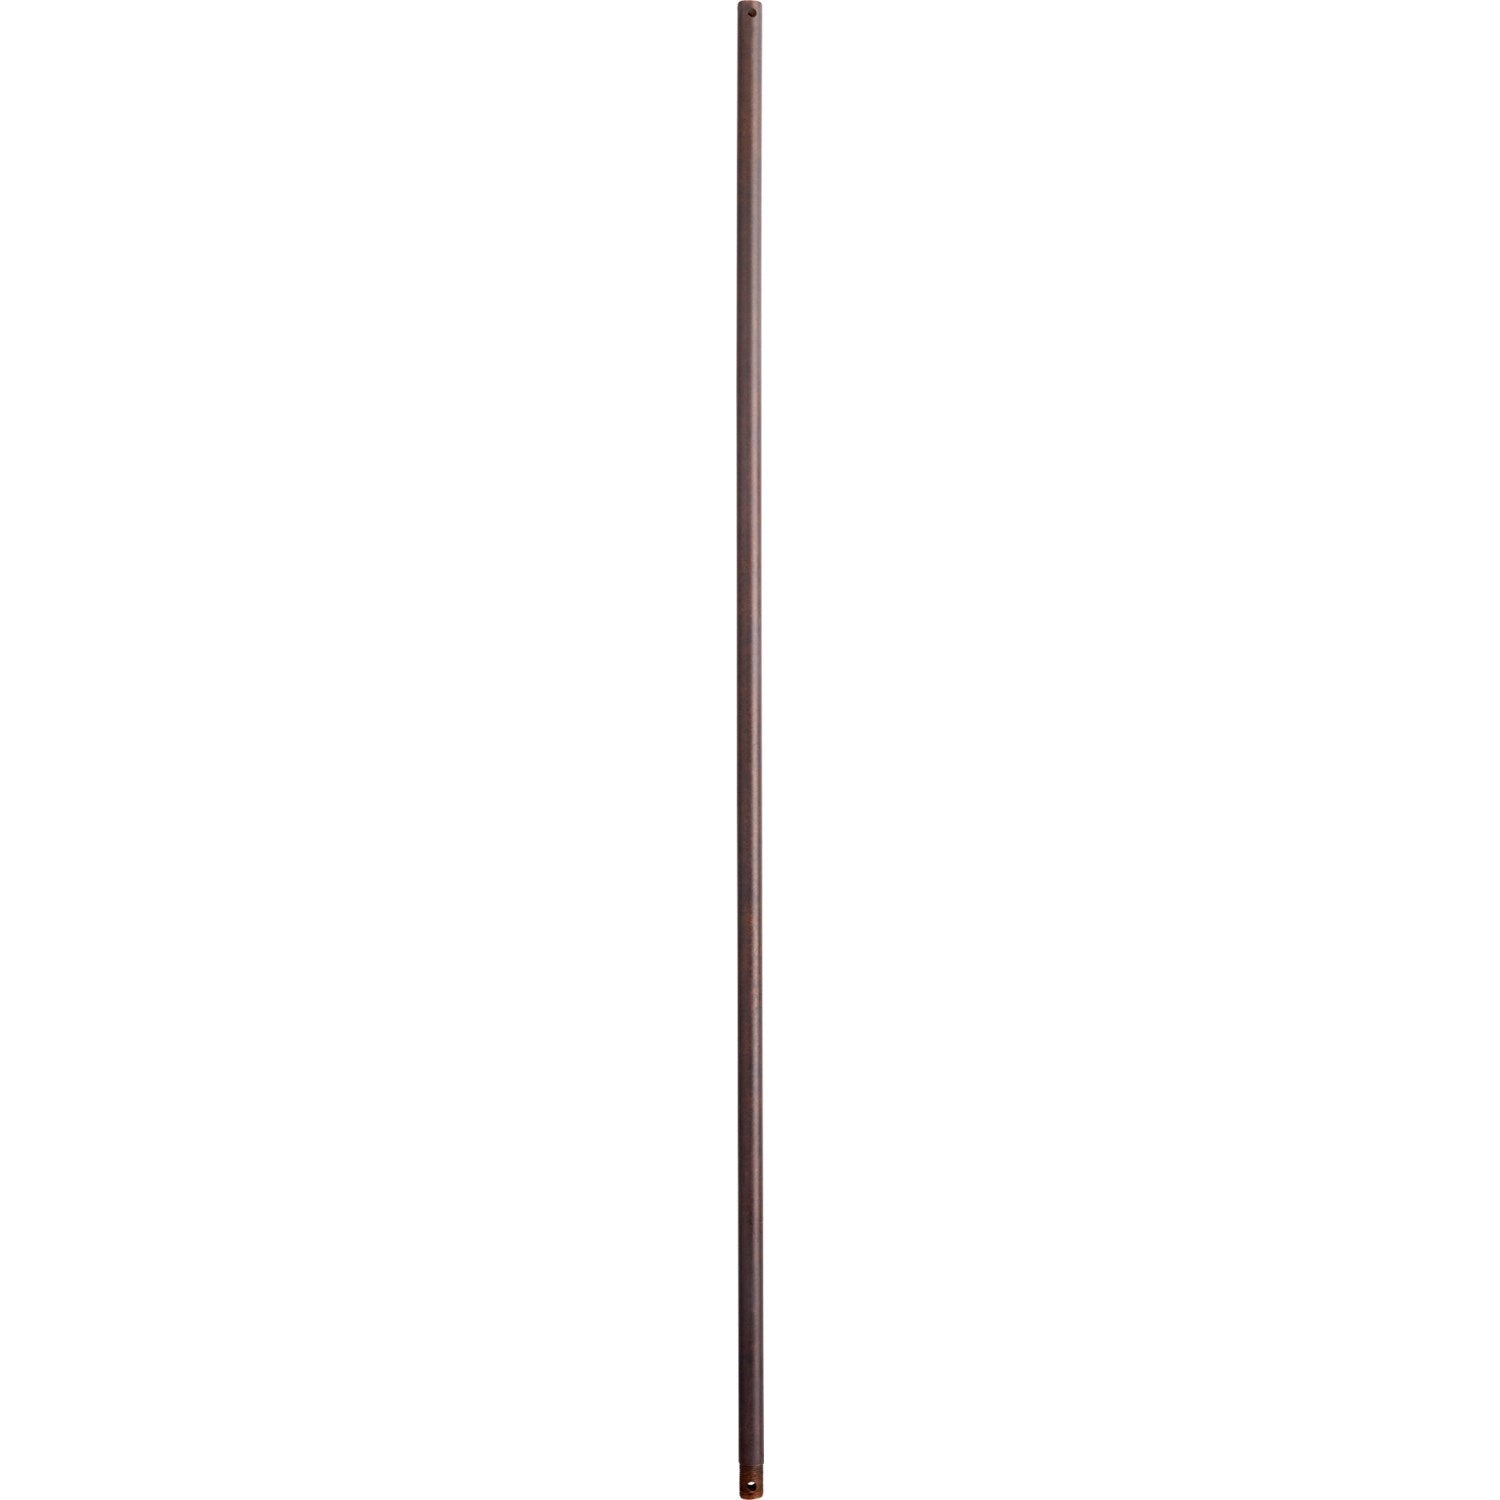 Quorum - 6-4844 - 48" Universal Downrod - 48 in. Downrods - Toasted Sienna